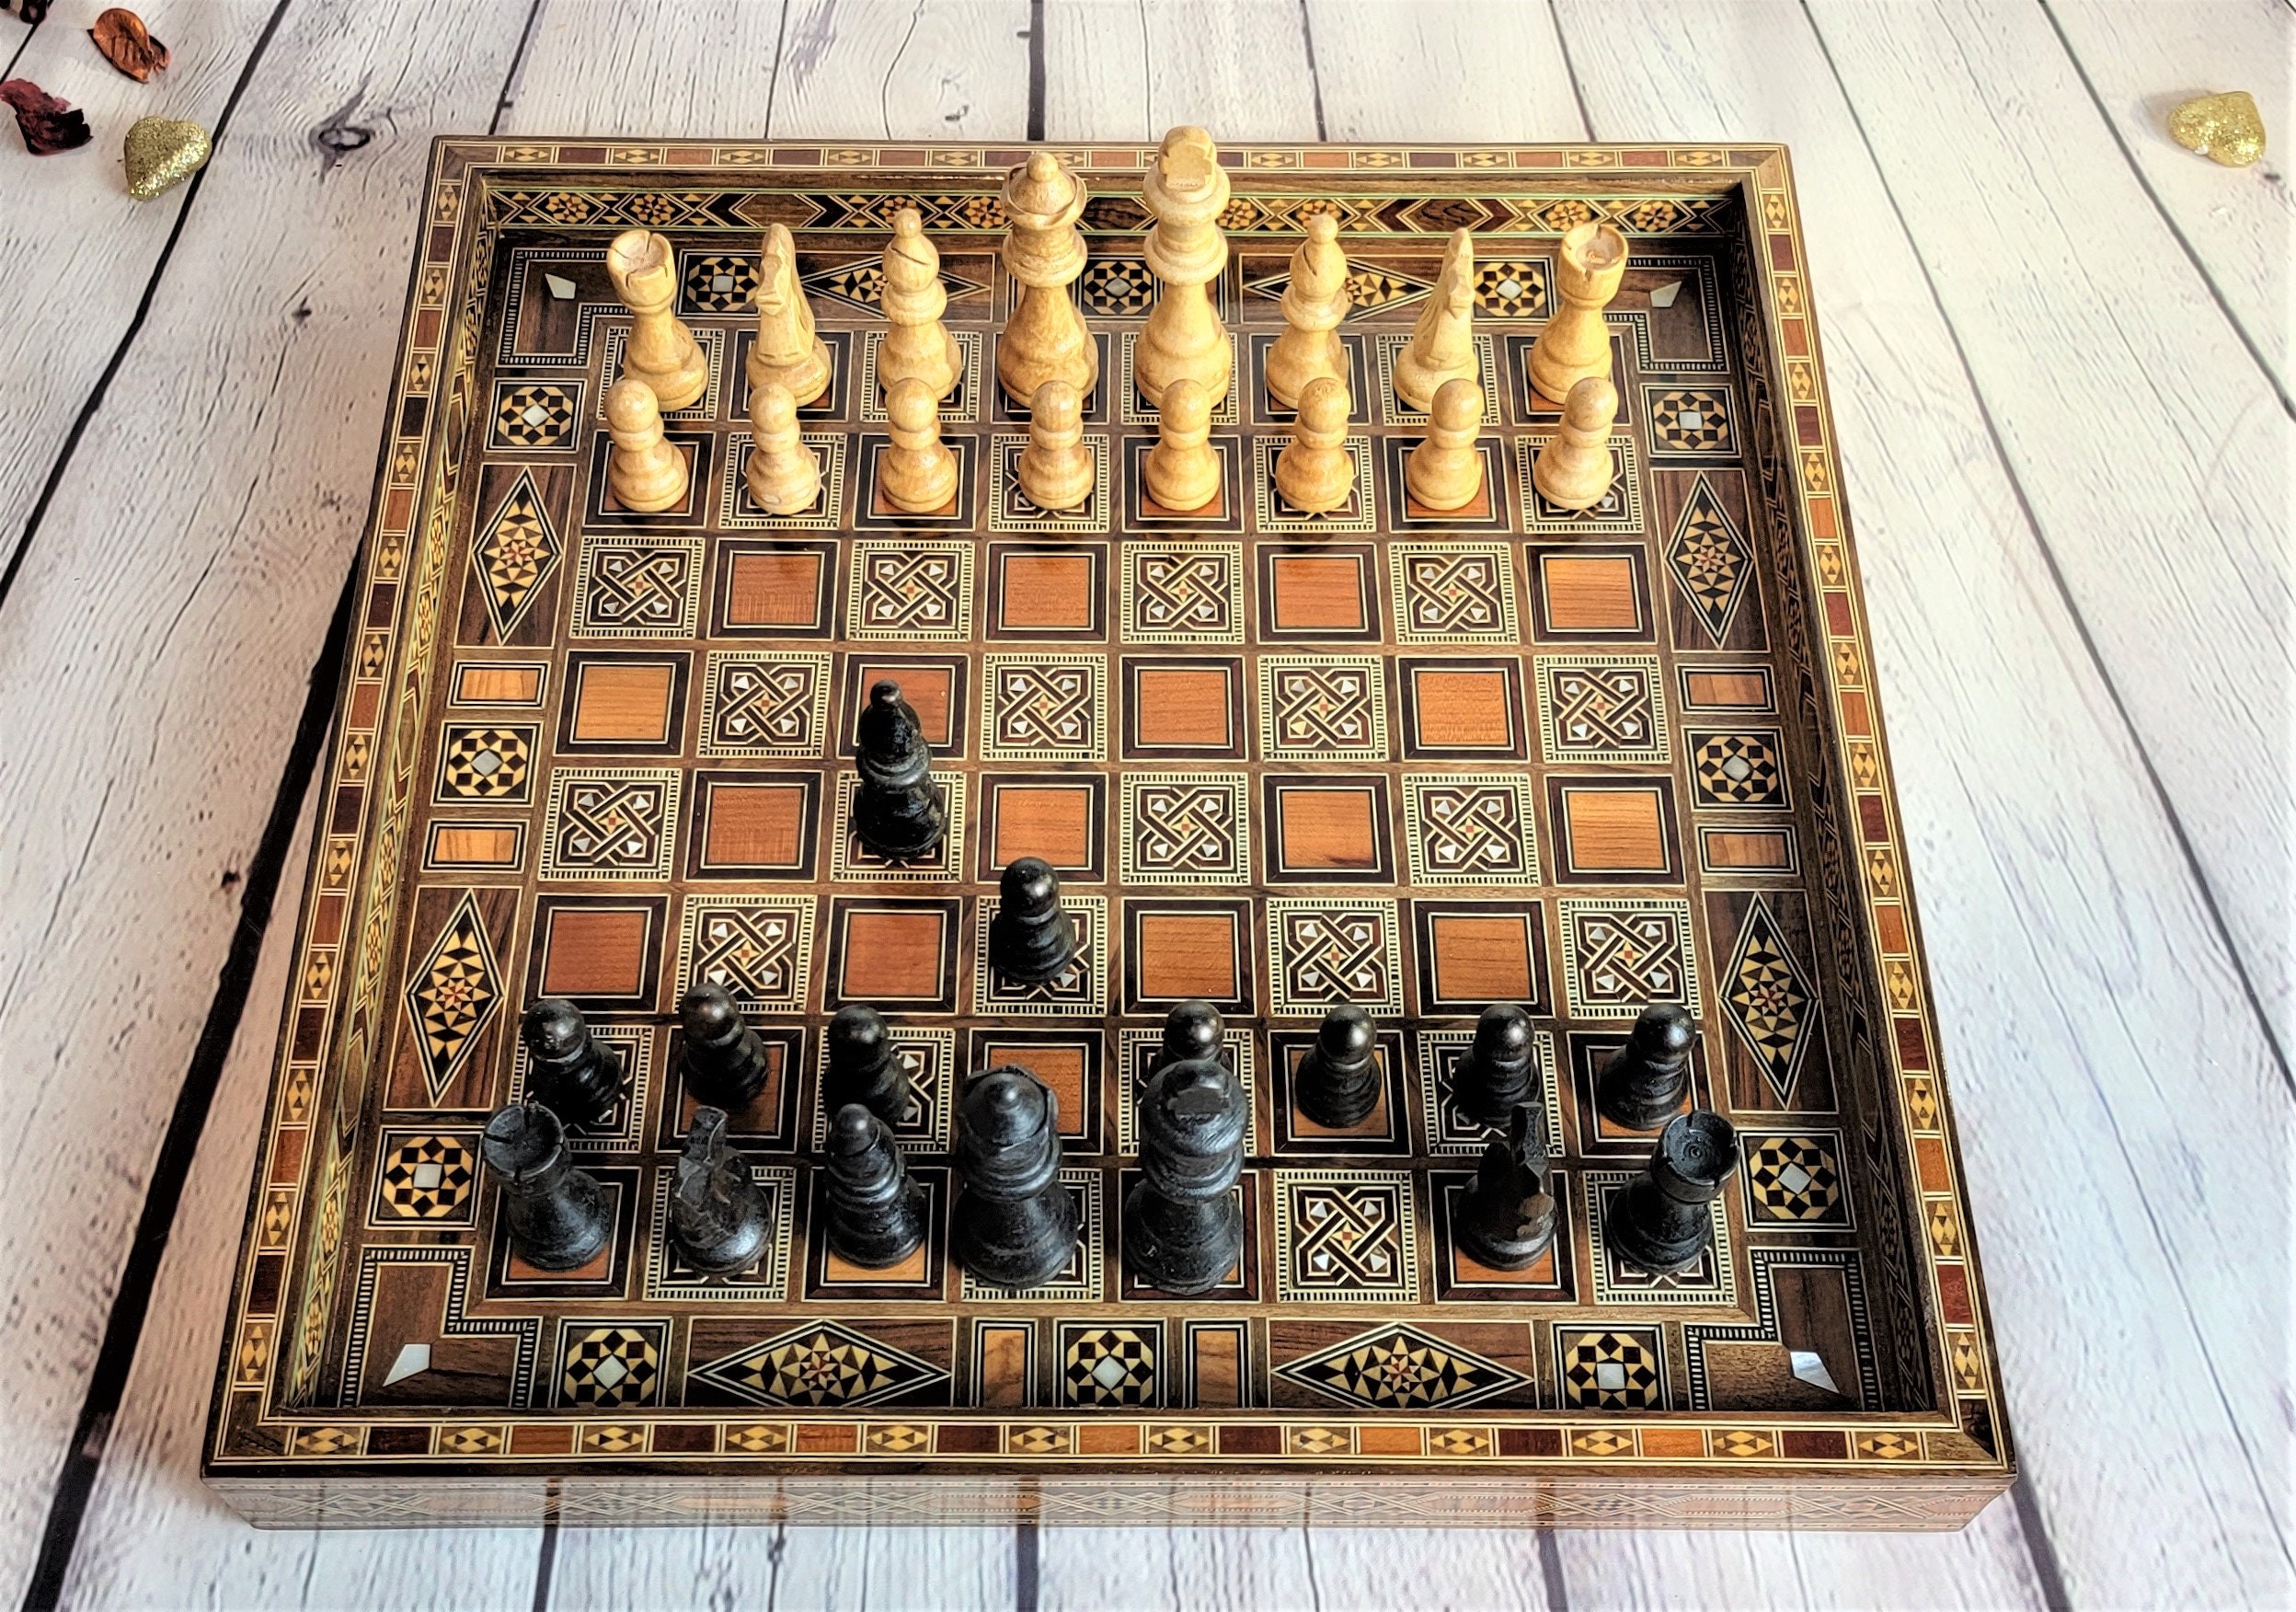 Check mate⁠ ⁠ Vintage Mid Century Ceramic Chess Set on Wood⁠ Dimensions:  Approx. ⁠ Board - 21.25 L x 21.25 W⁠ Pieces - 1.5 D x 3.75-5 H…